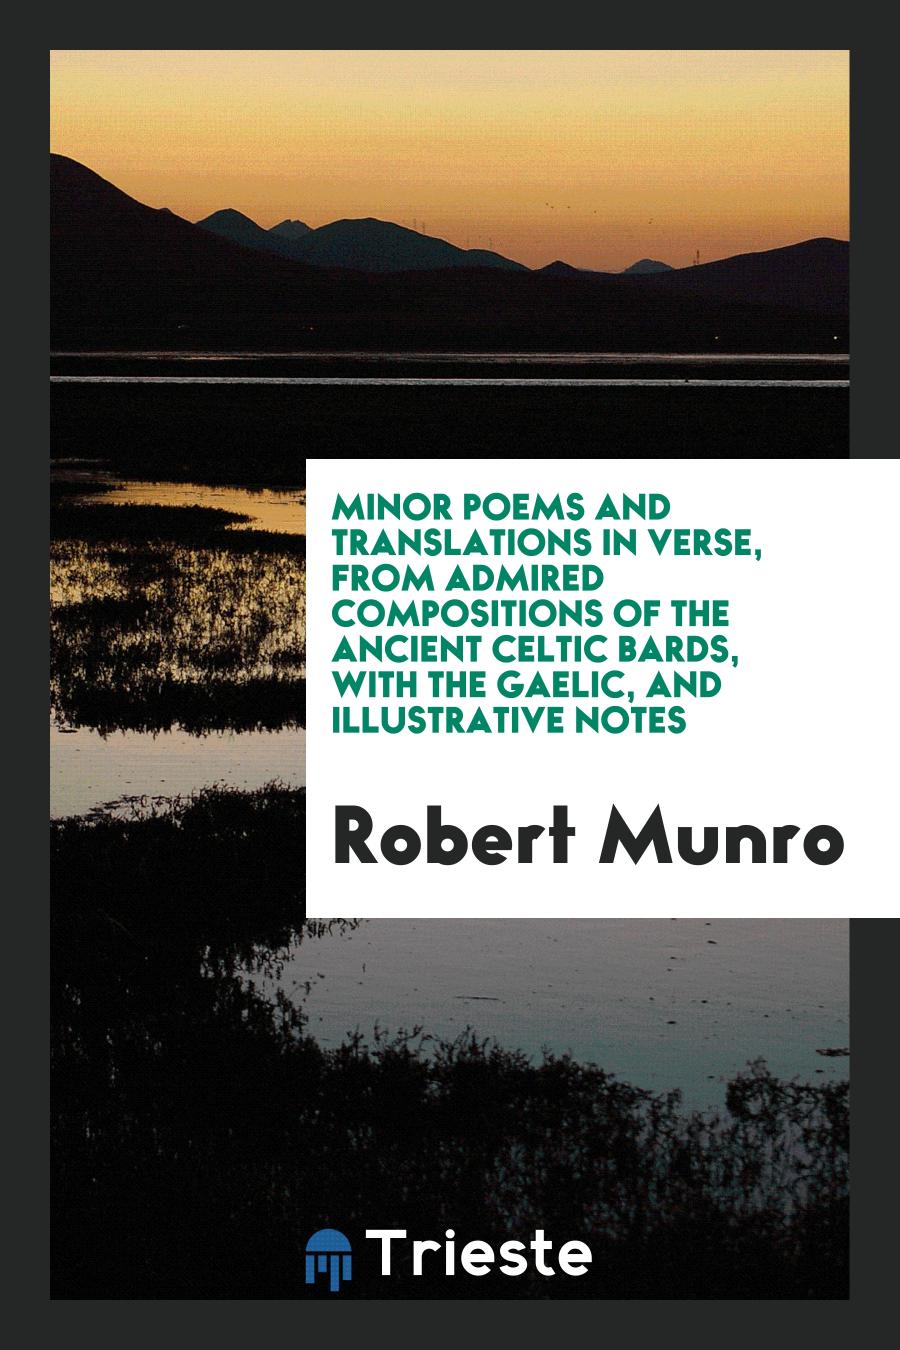 Minor poems and translations in verse, from admired compositions of the ancient Celtic bards, with the Gaelic, and illustrative notes